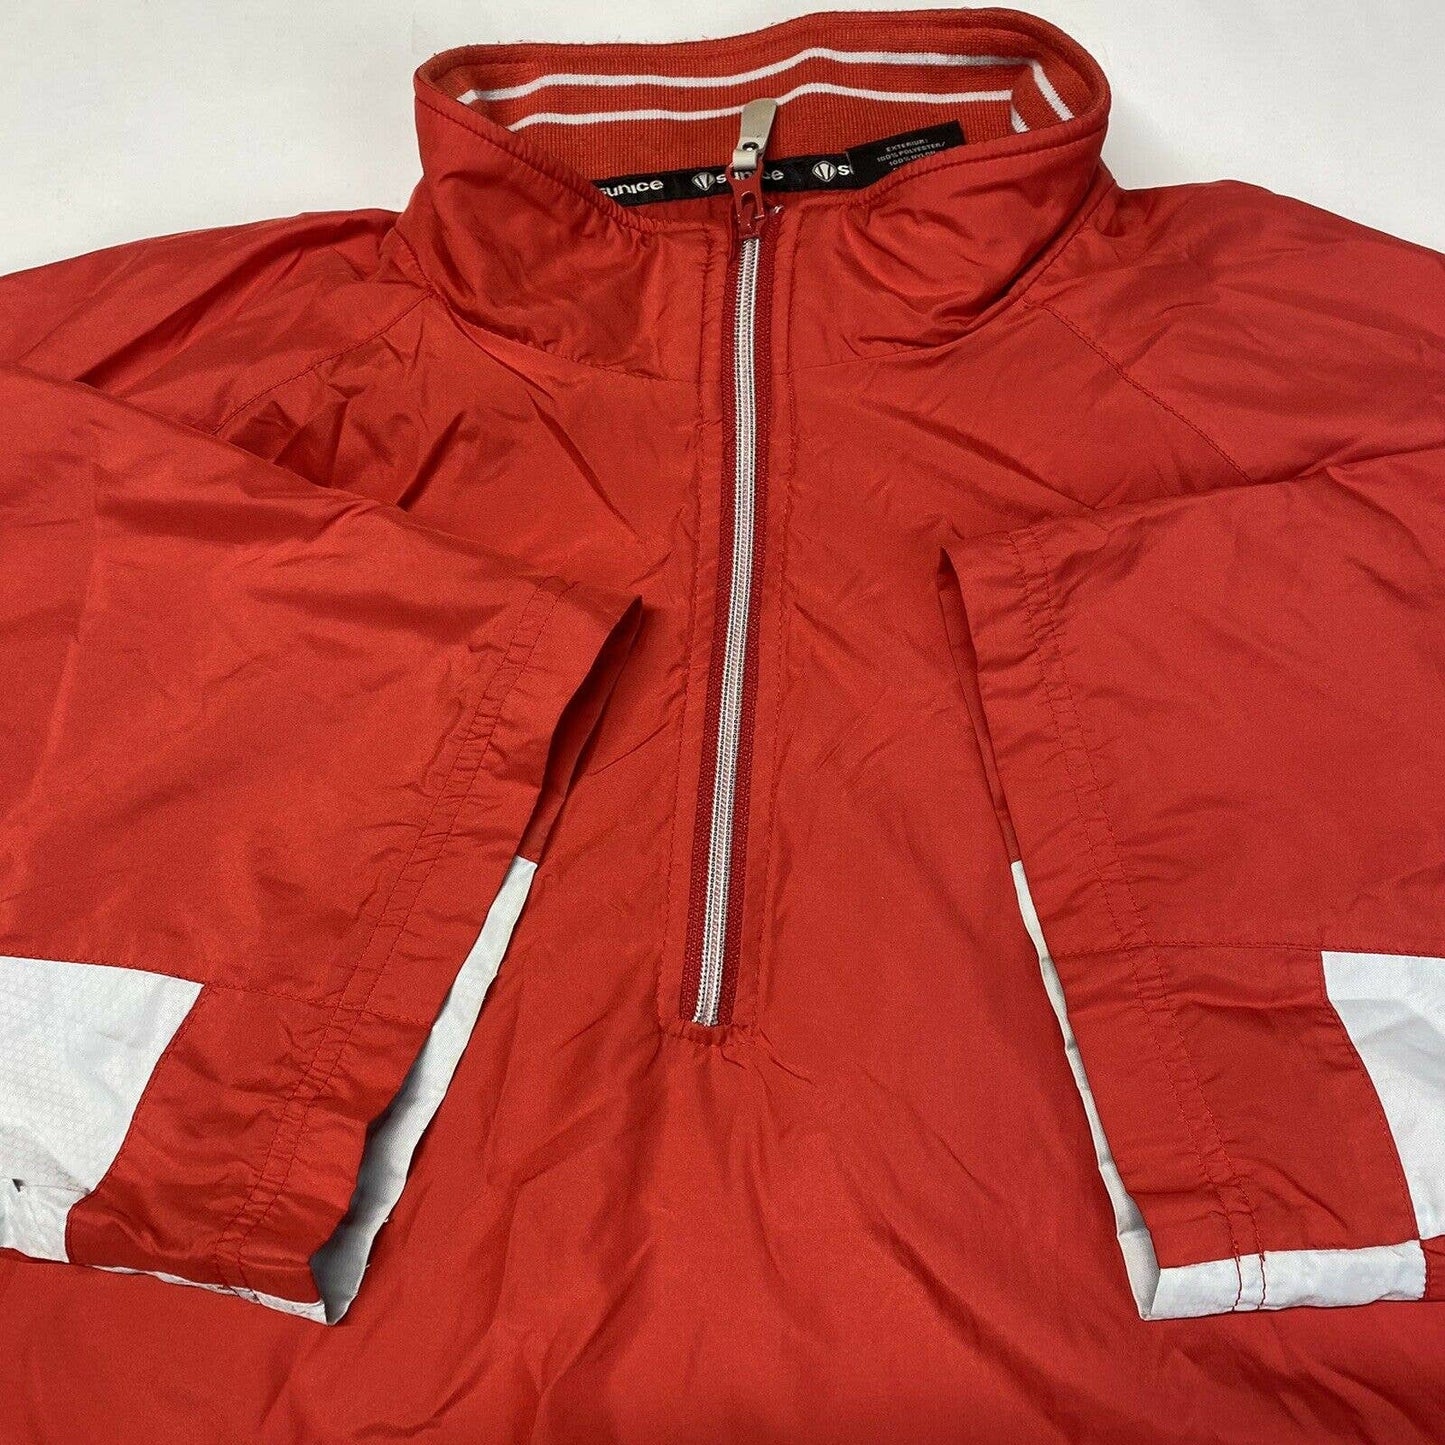 Sunice 1/4 Zip Pullover Short Sleeve Weather Jacket XLarge Red Lightweight *Flaw